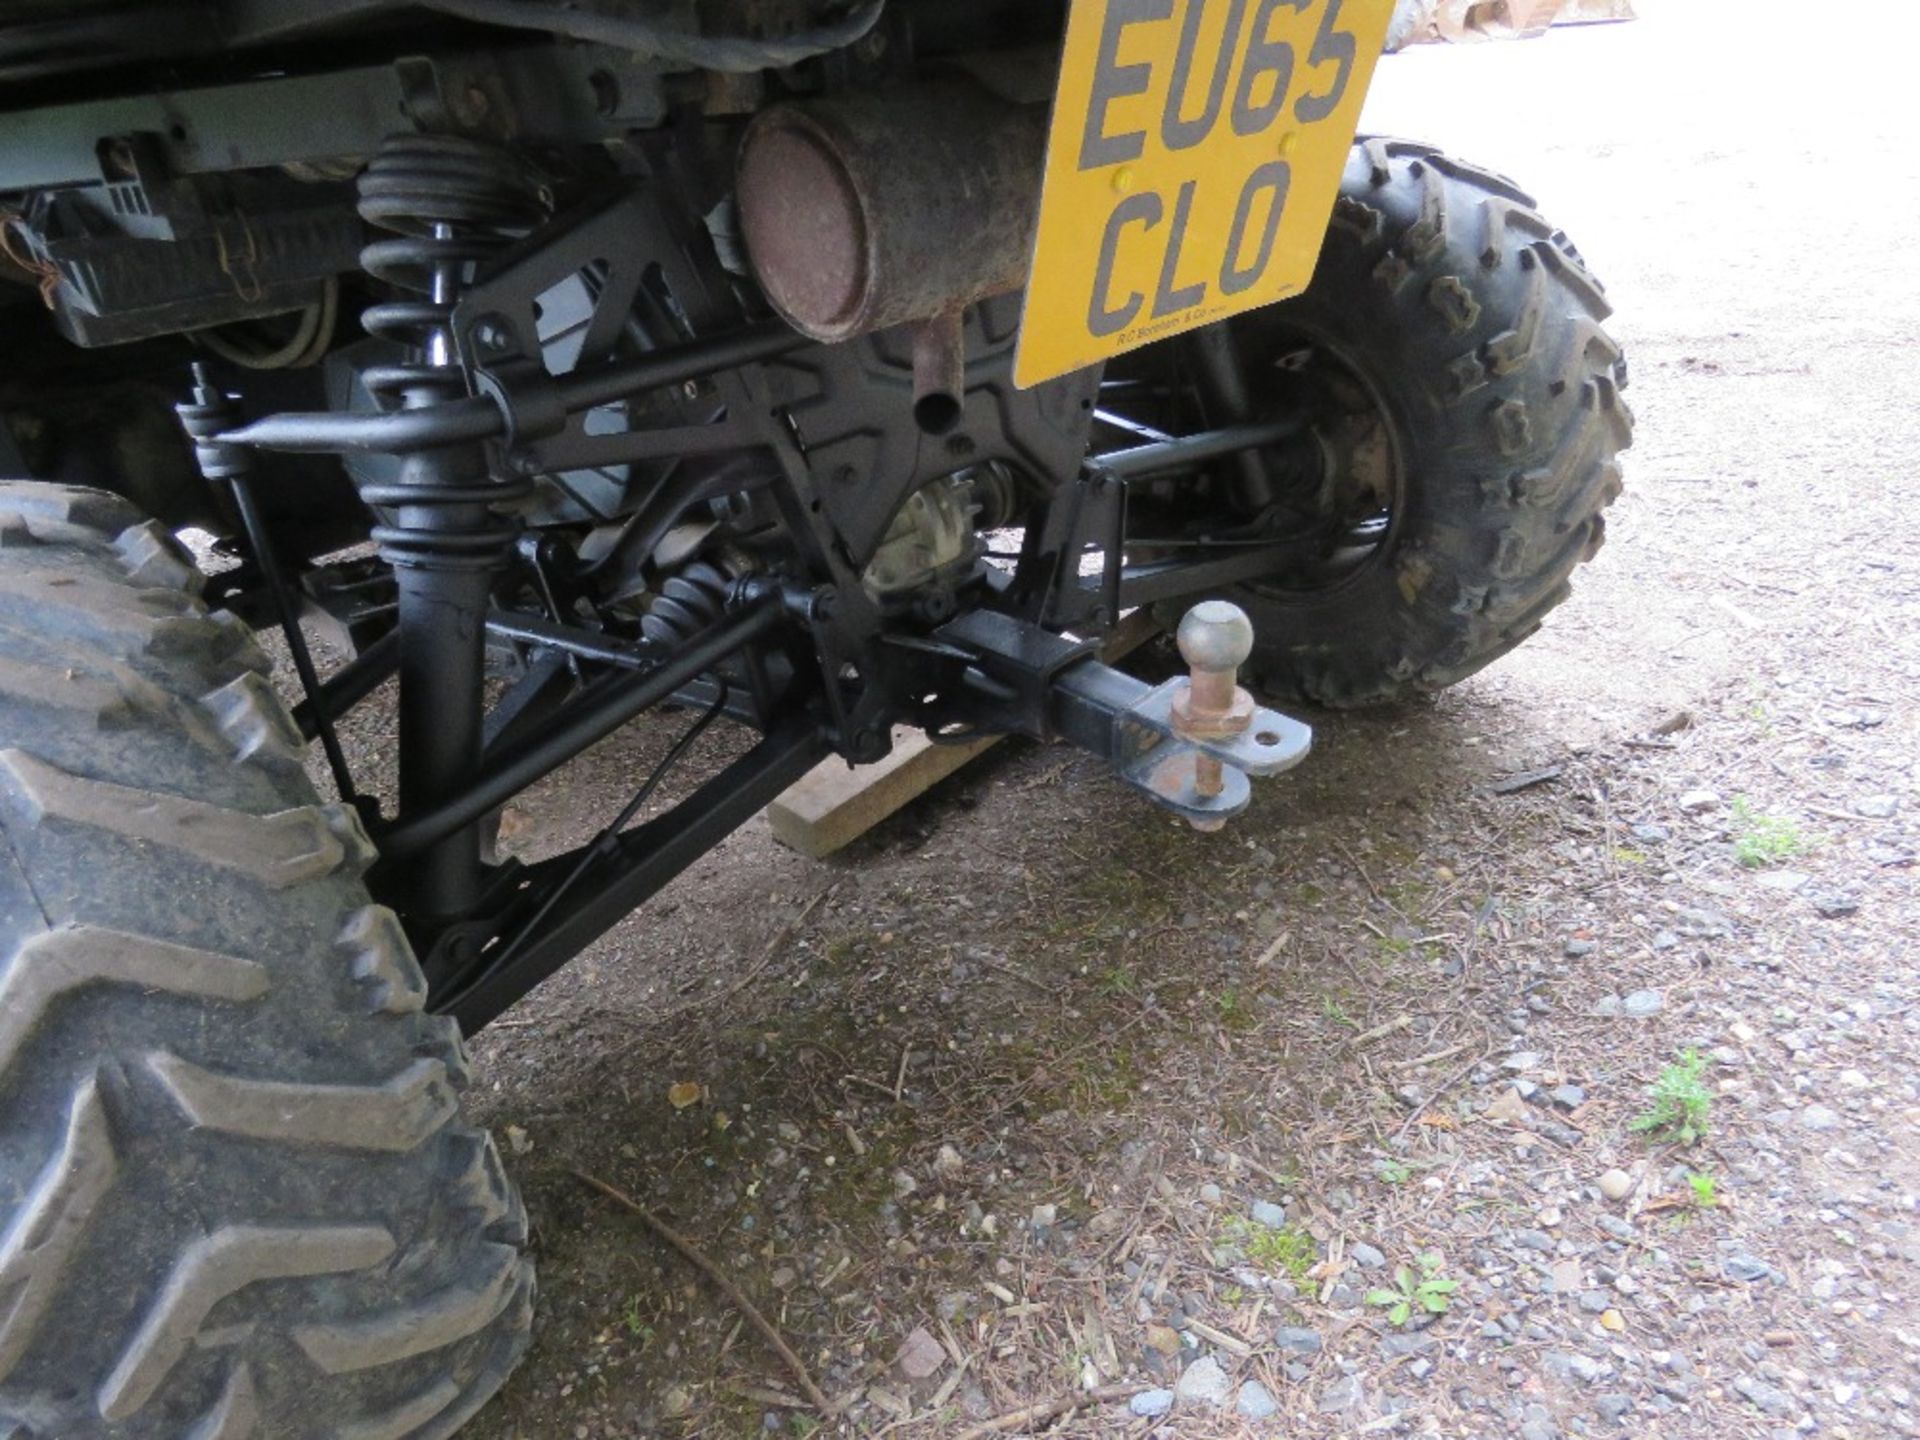 POLARIS RANGER DIESEL RTV REG:EU65 CLO. WHEN TESTED WAS SEEN TO DRIVE, STEER AND BRAKE......REQUIRES - Image 4 of 9